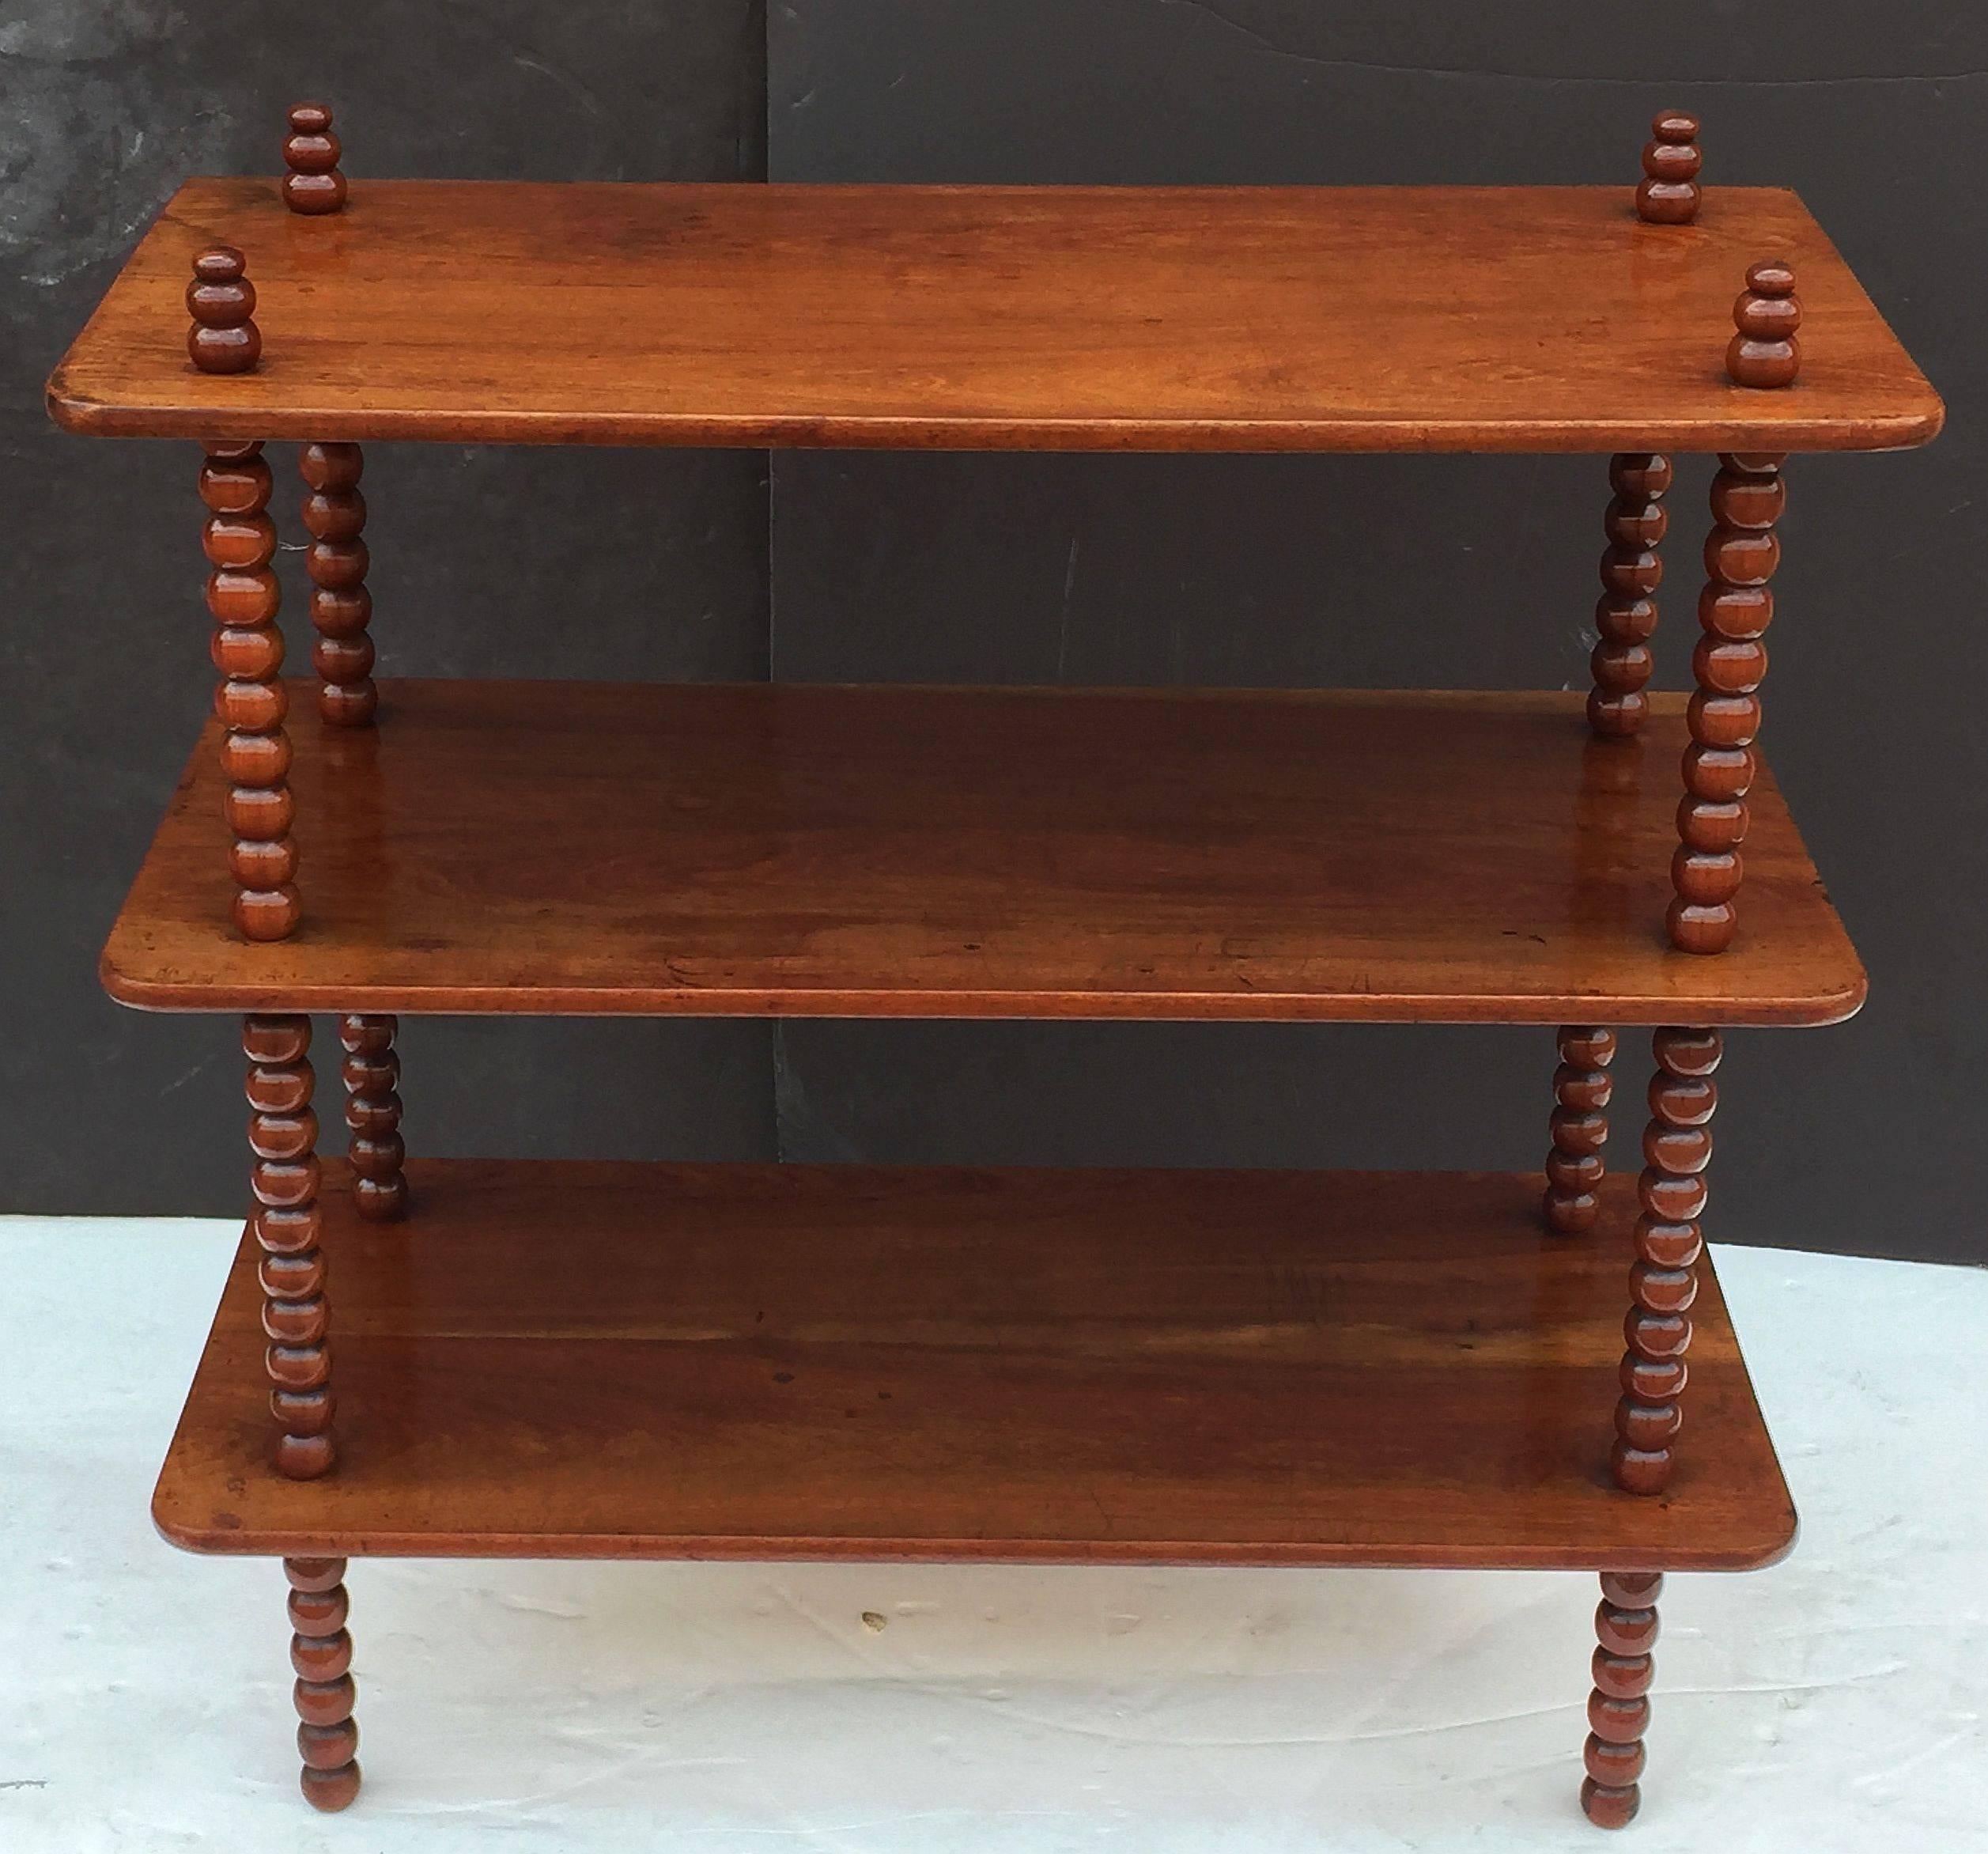 A fine English rectangular standing shelf console of mahogany from the Edwardian era, featuring three tiers or shelves and four bobbin turned supports.

Would make a great bookcase for a library or study.